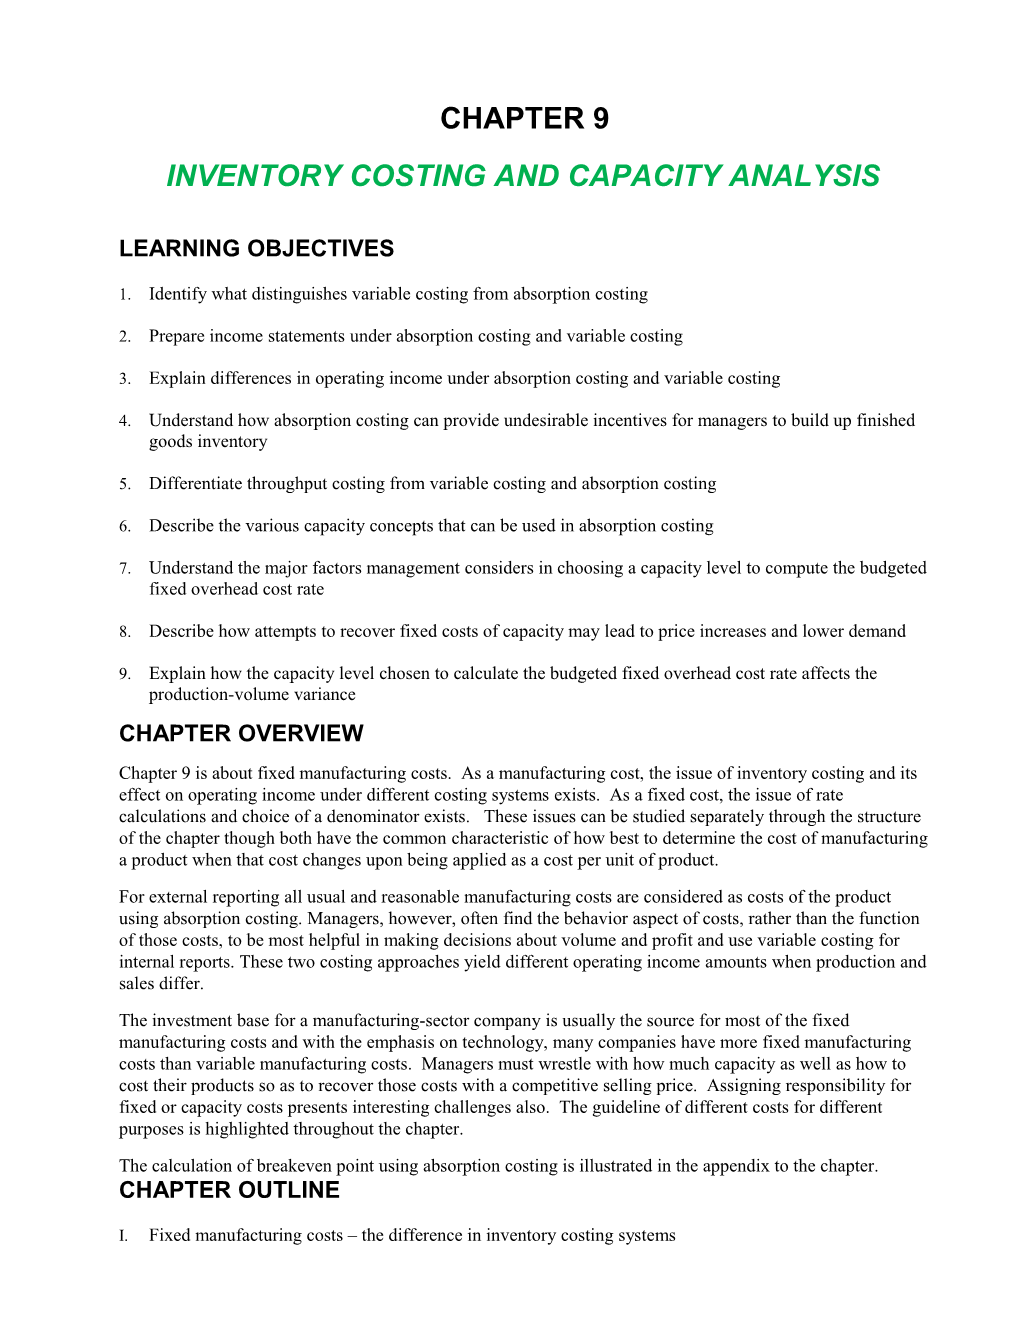 Inventory Costing and Capacity Analysis s1